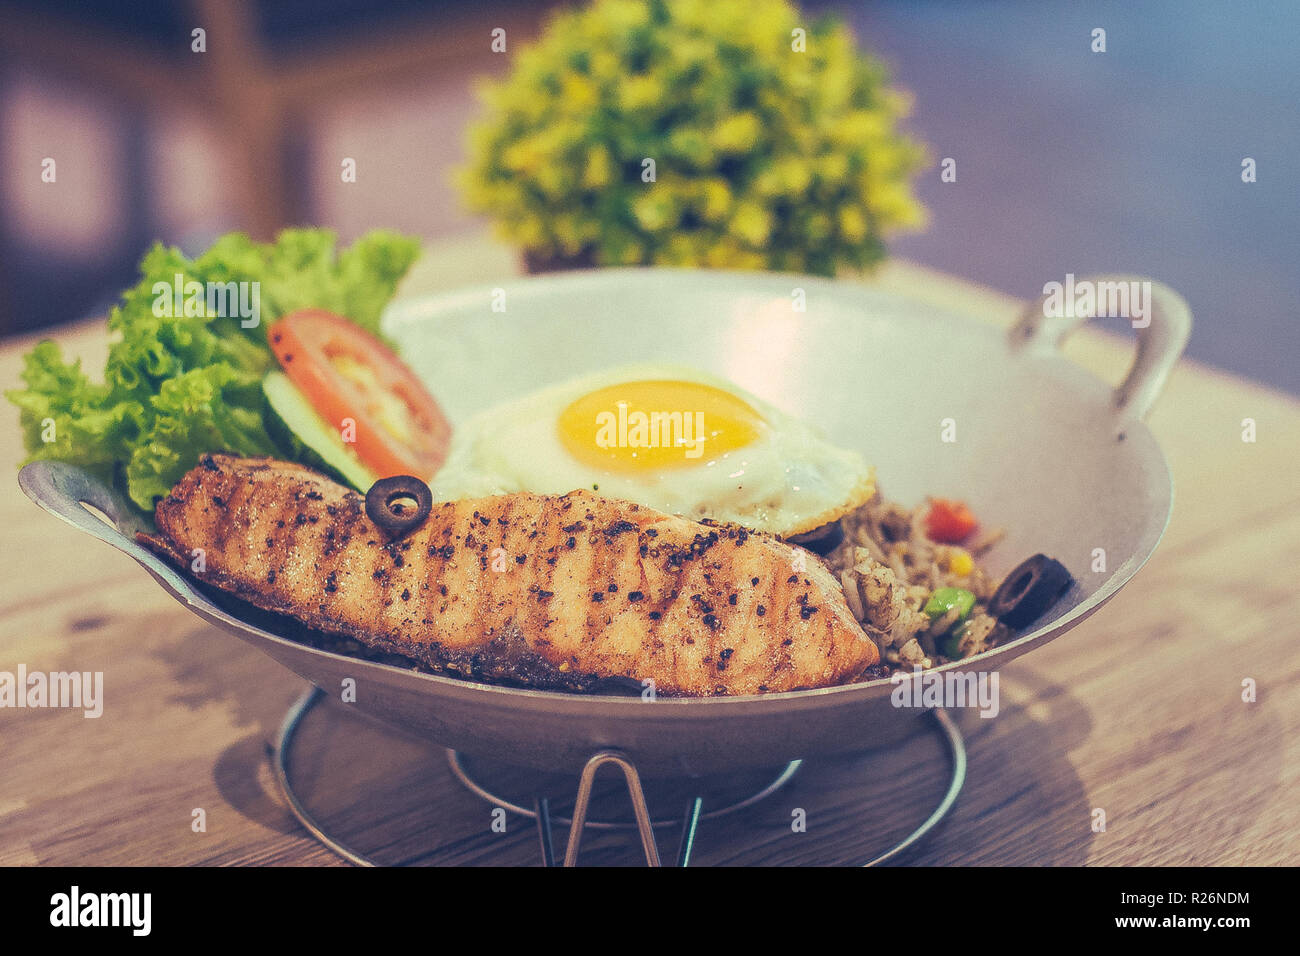 Black Olive Fried Rice with Grilled Salmon fried egg and mixed vegetable Stock Photo